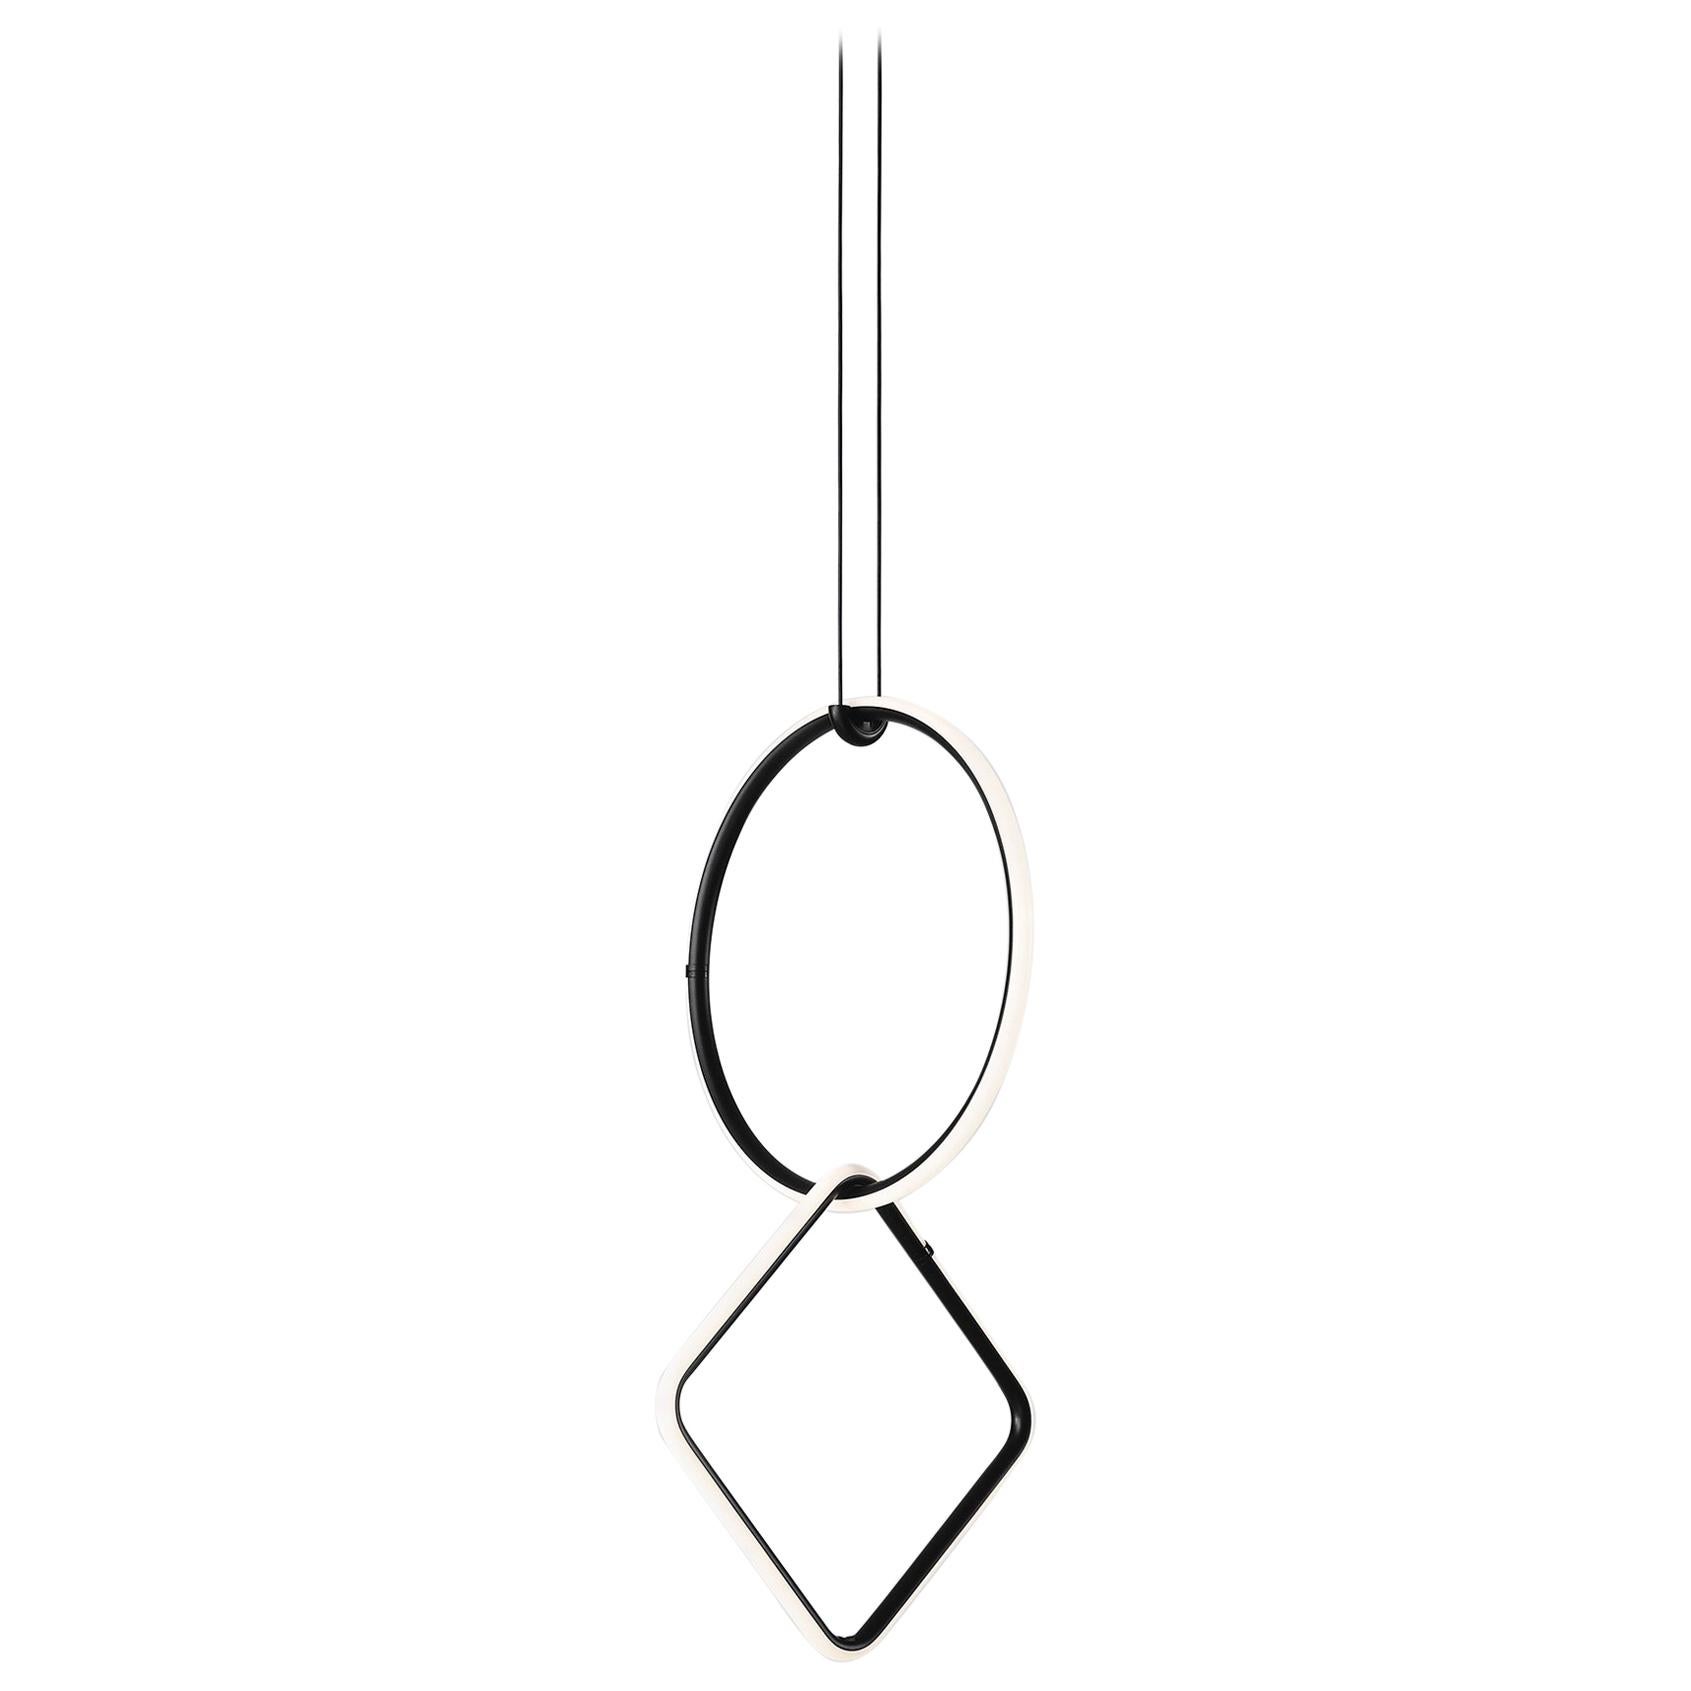 FLOS Small Circle and Square Arrangements Light by Michael Anastassiades For Sale